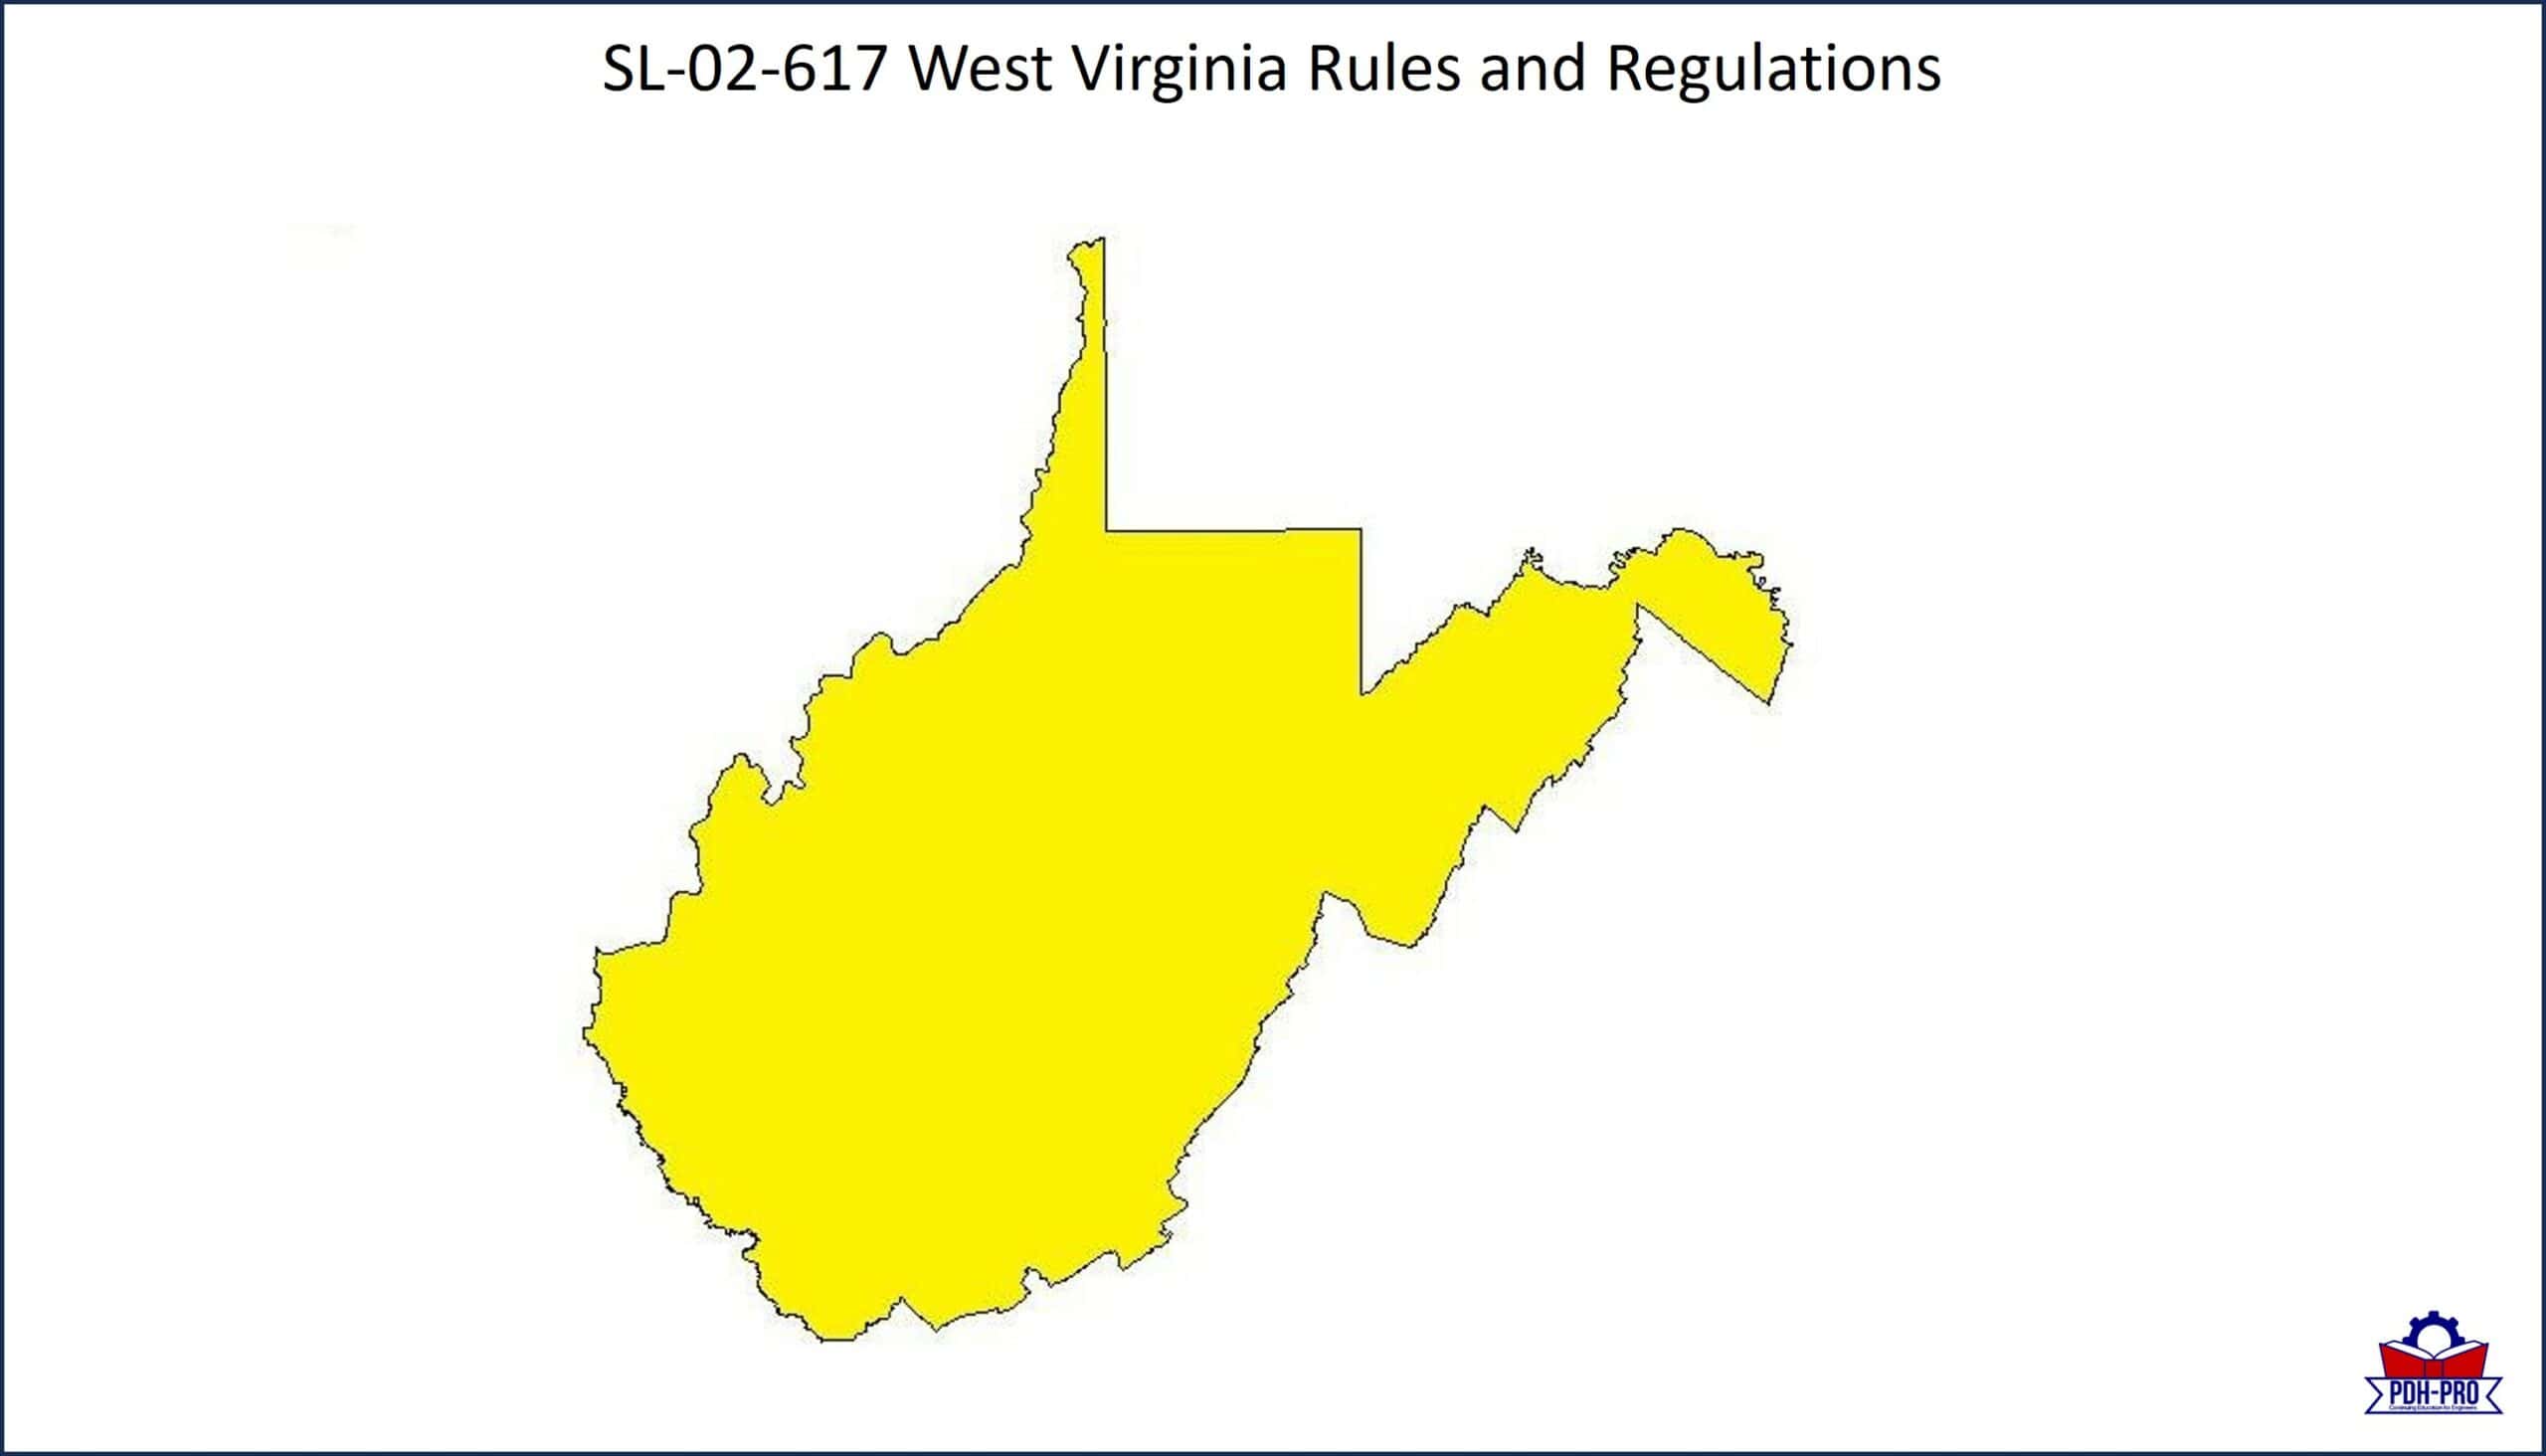 West Virginia Rules and Regulations